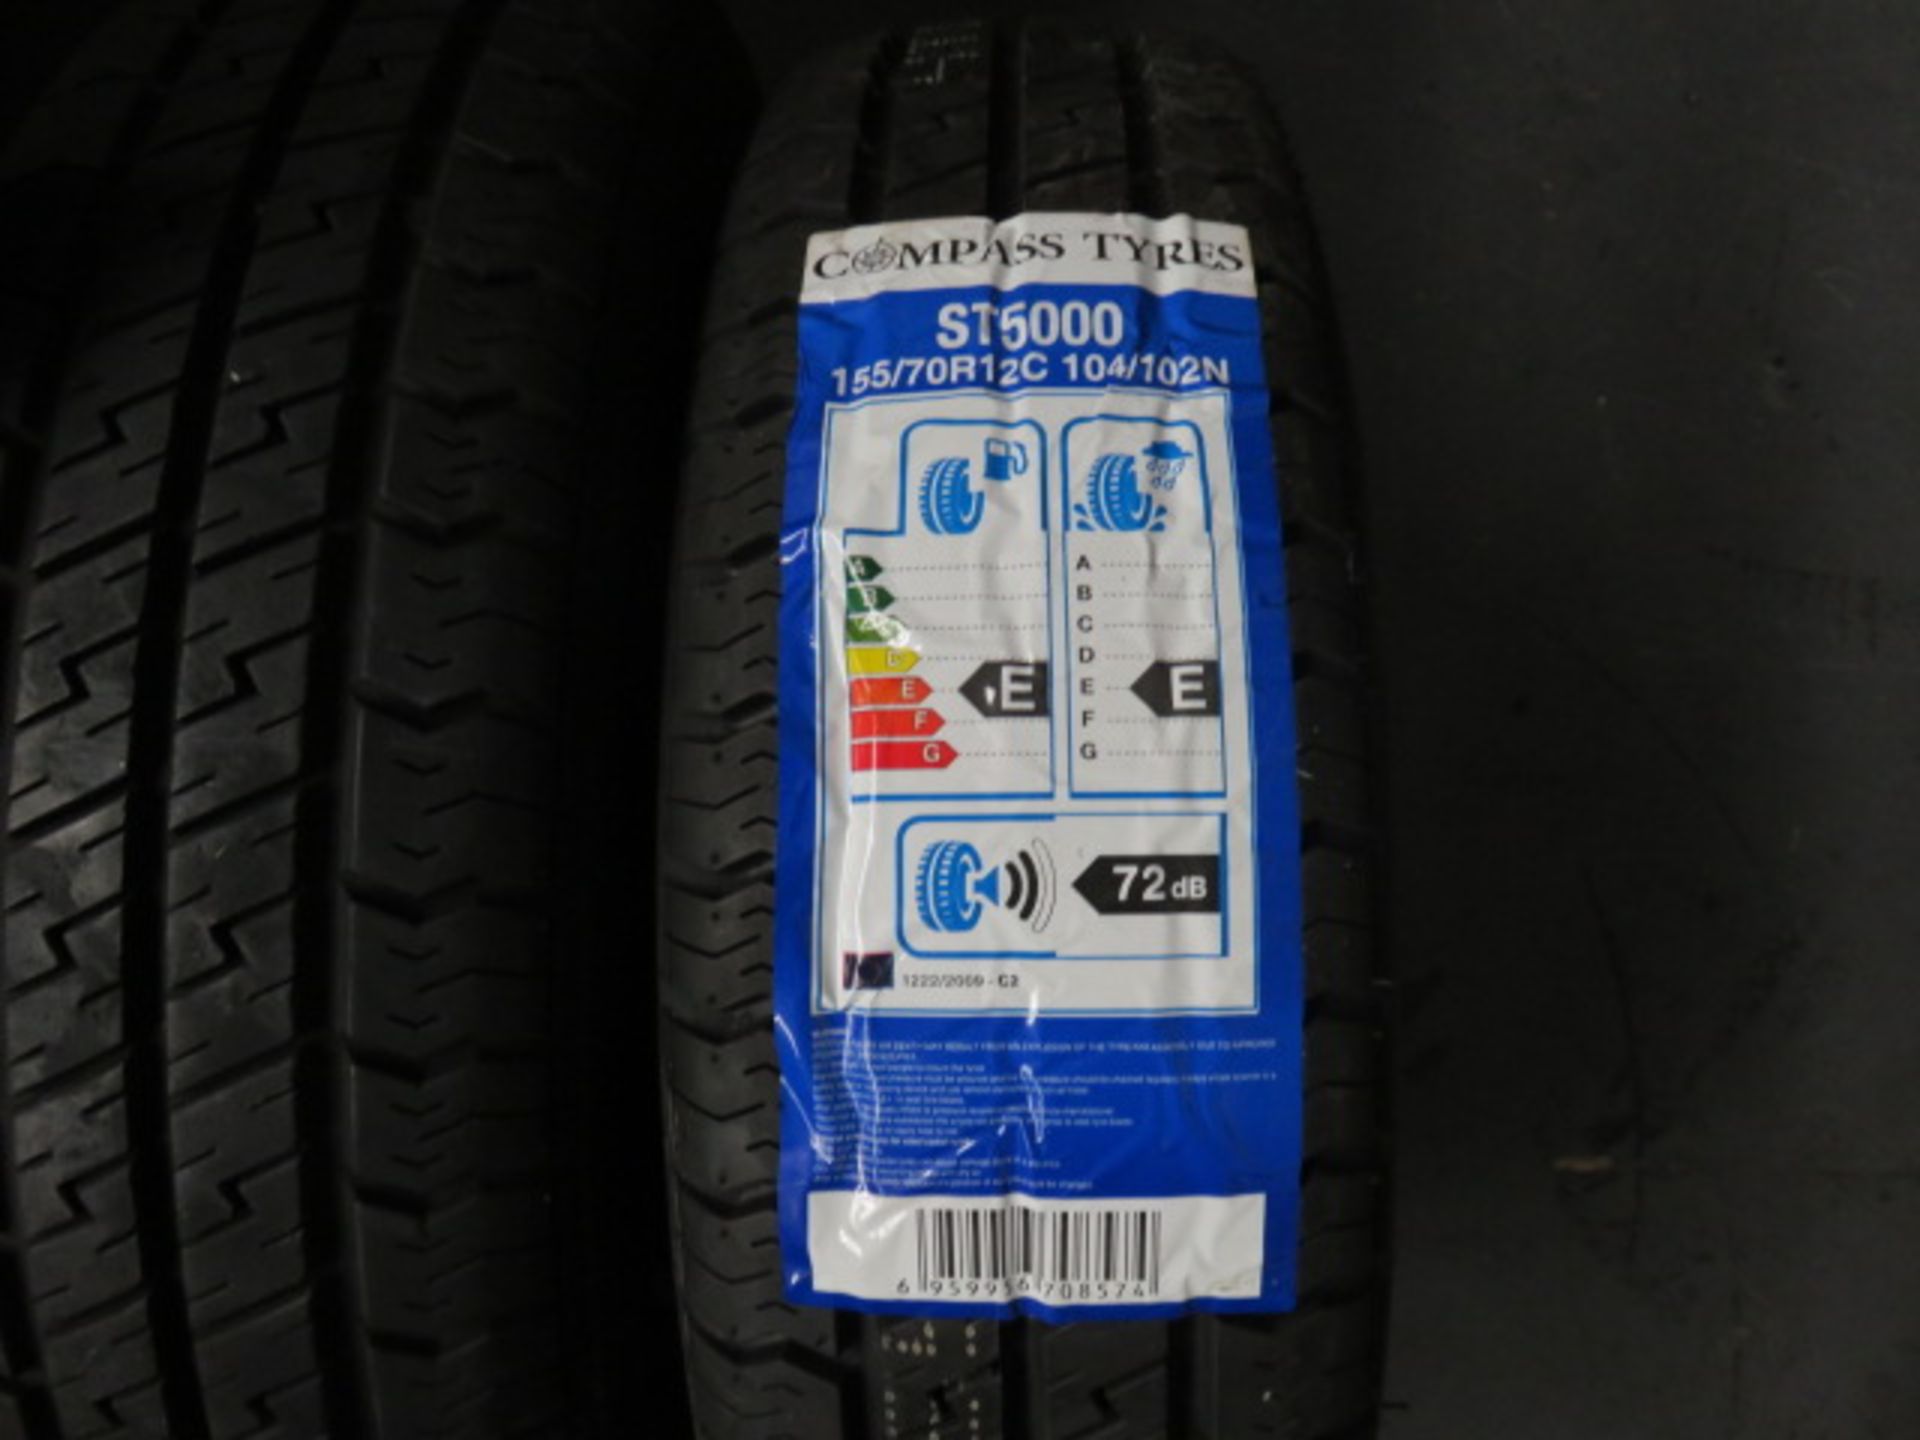 2 x New Compass Tyres ST5000 155/70R12C Trailer Tyres As Lotted - Image 2 of 2